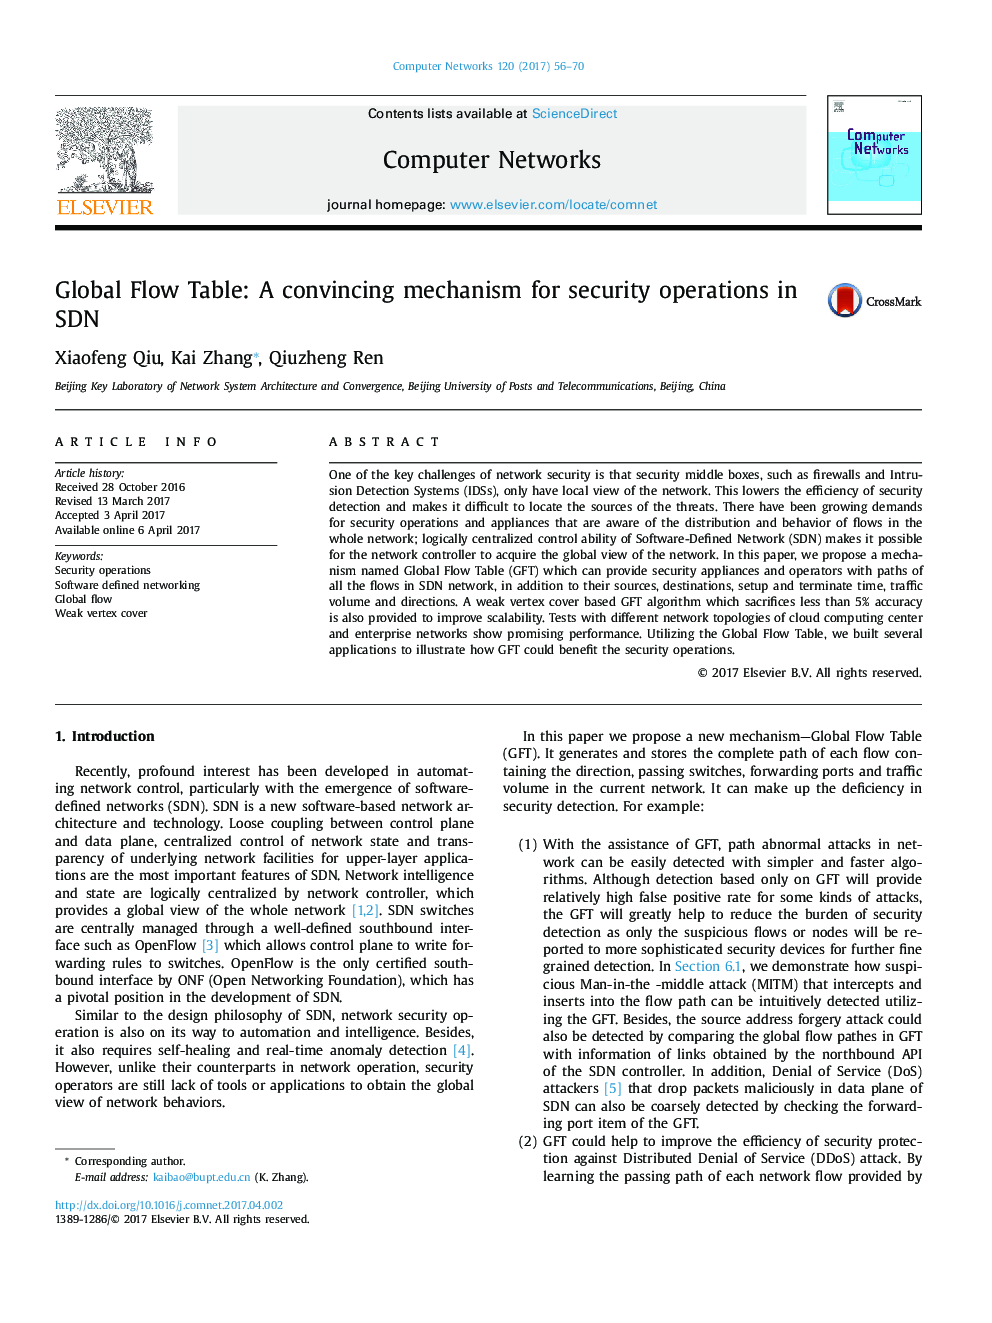 Global Flow Table: A convincing mechanism for security operations in SDN